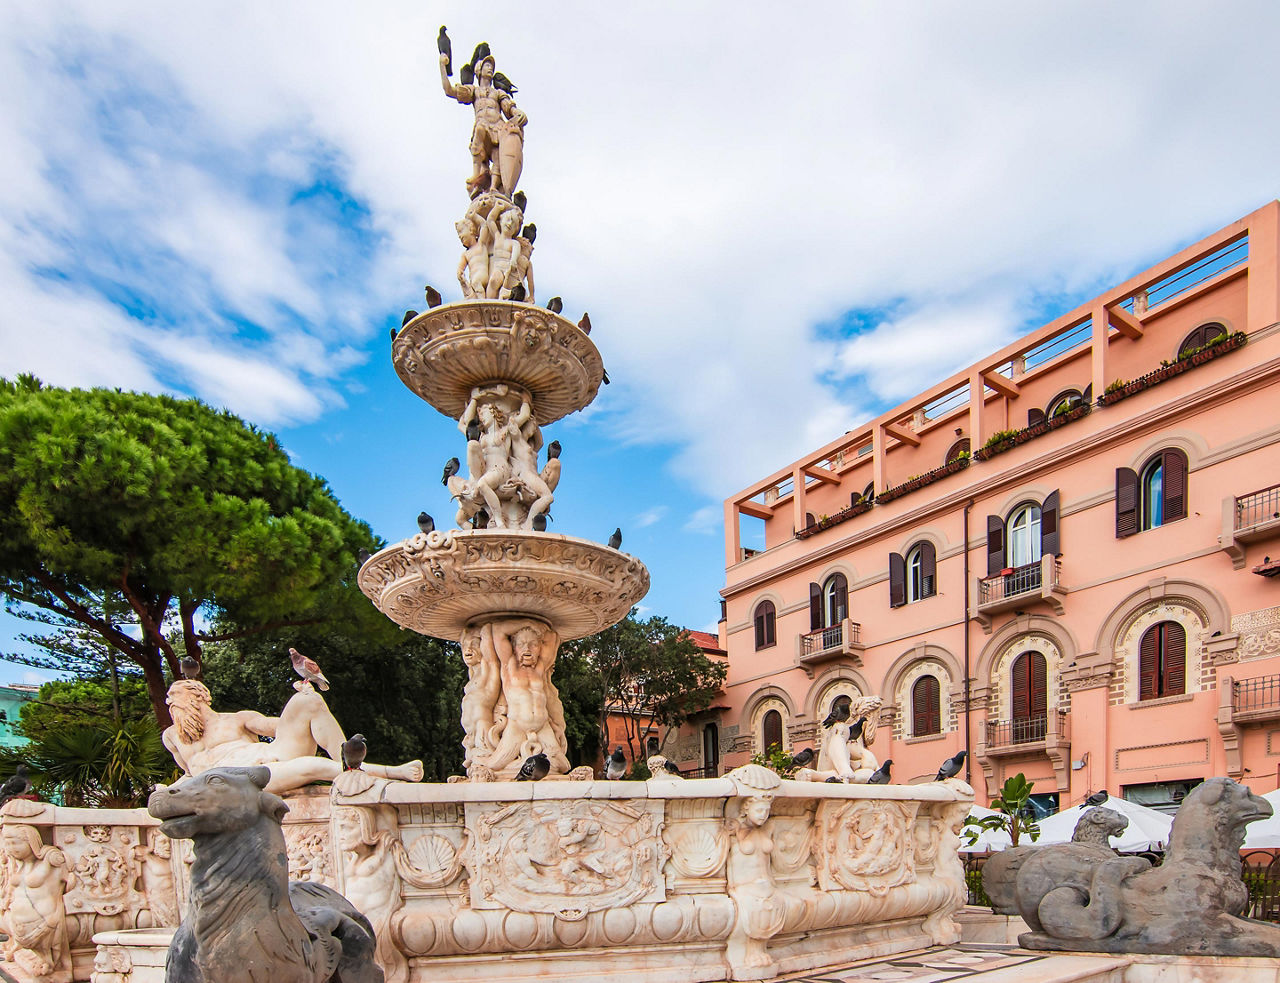 Sicily (Messina), Italy, Orions Fountain